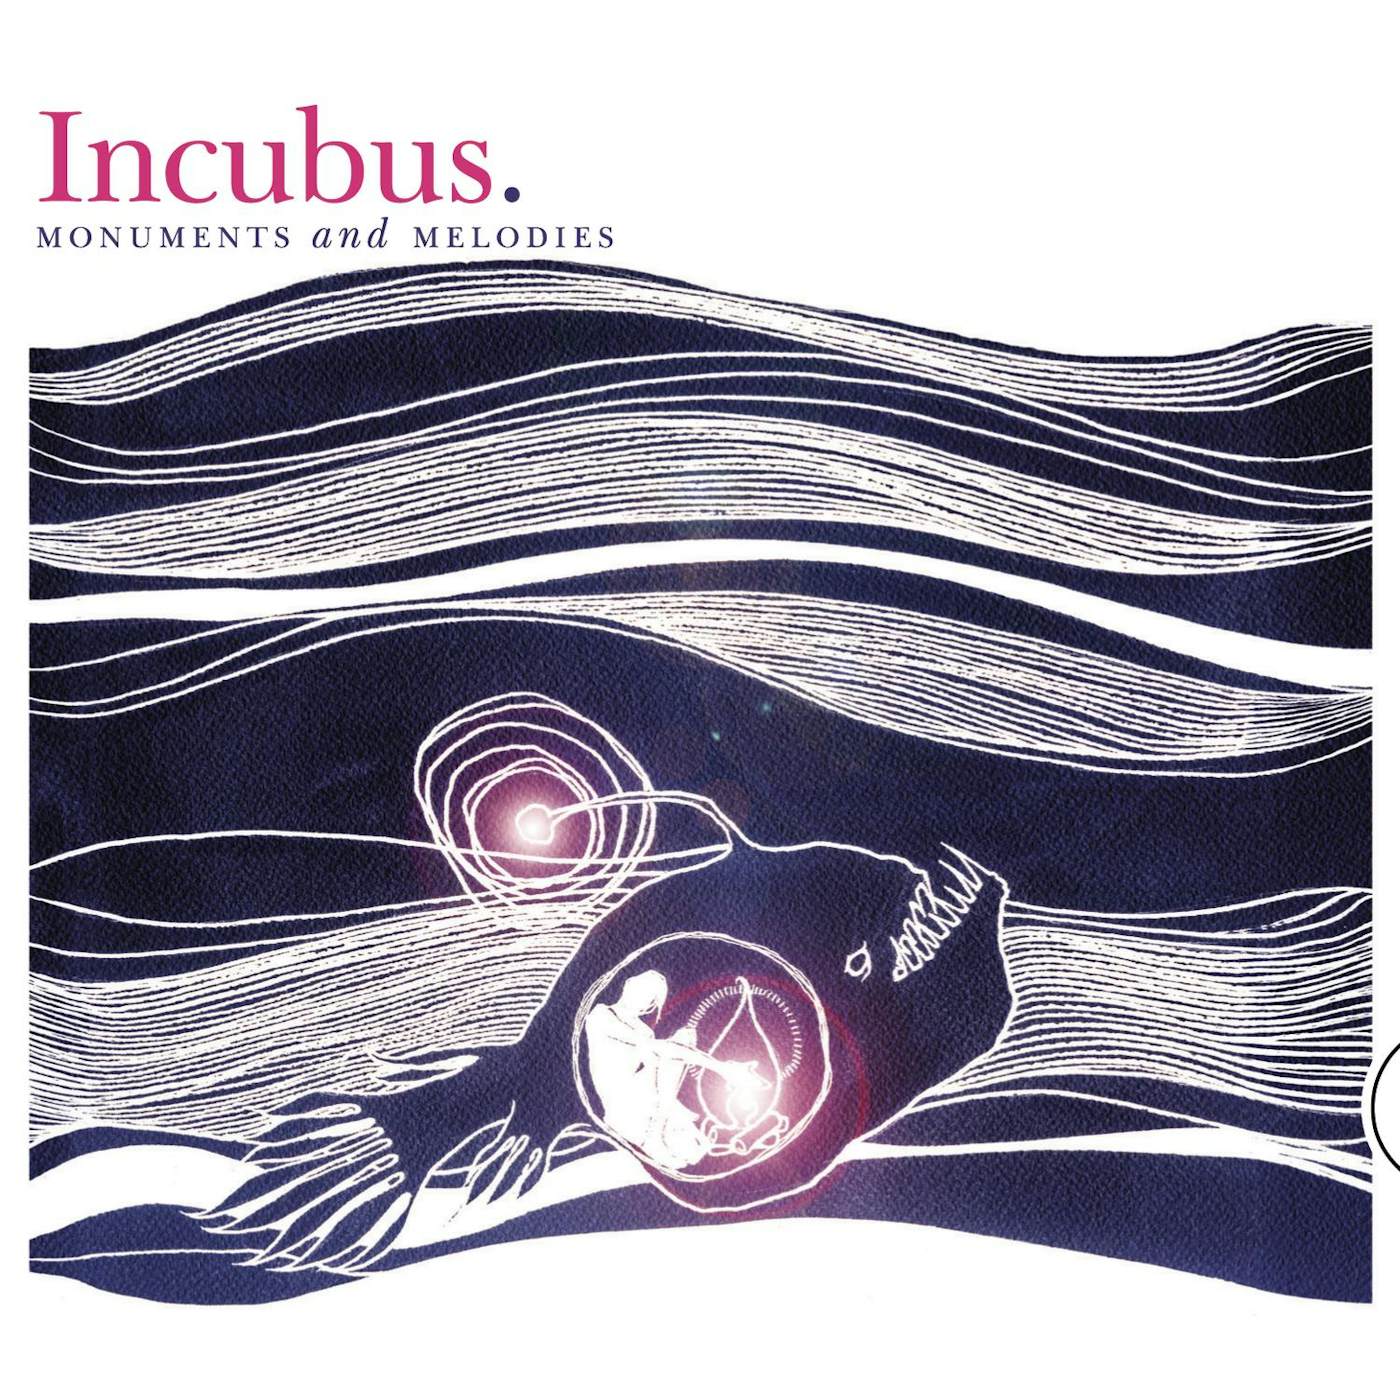 Incubus MONUMENTS & MELODIES CD